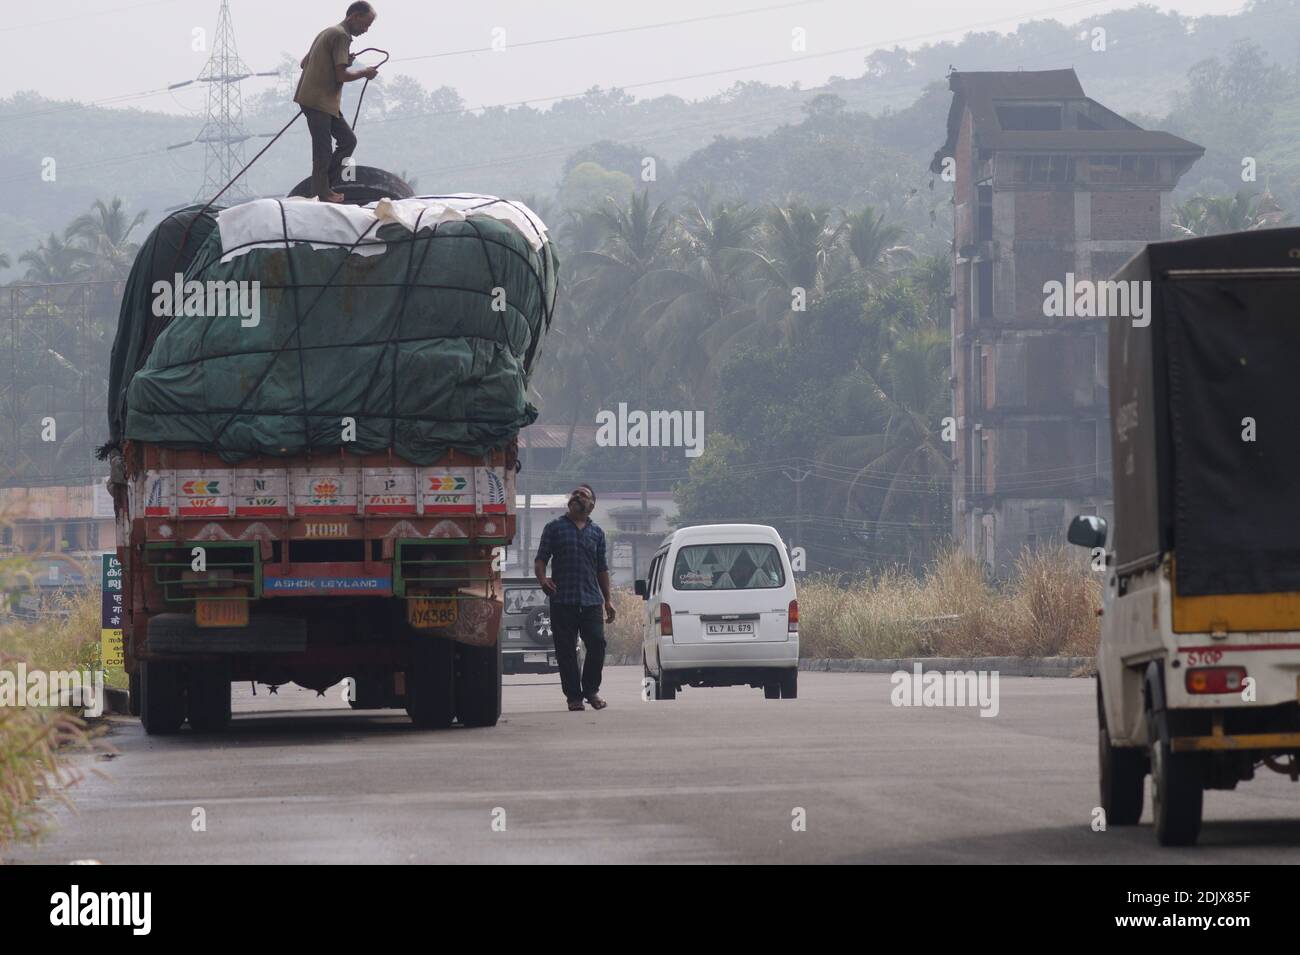 Thrissur, Kerala, India - 11-26-2020: A lorry parked at the side of a road Stock Photo